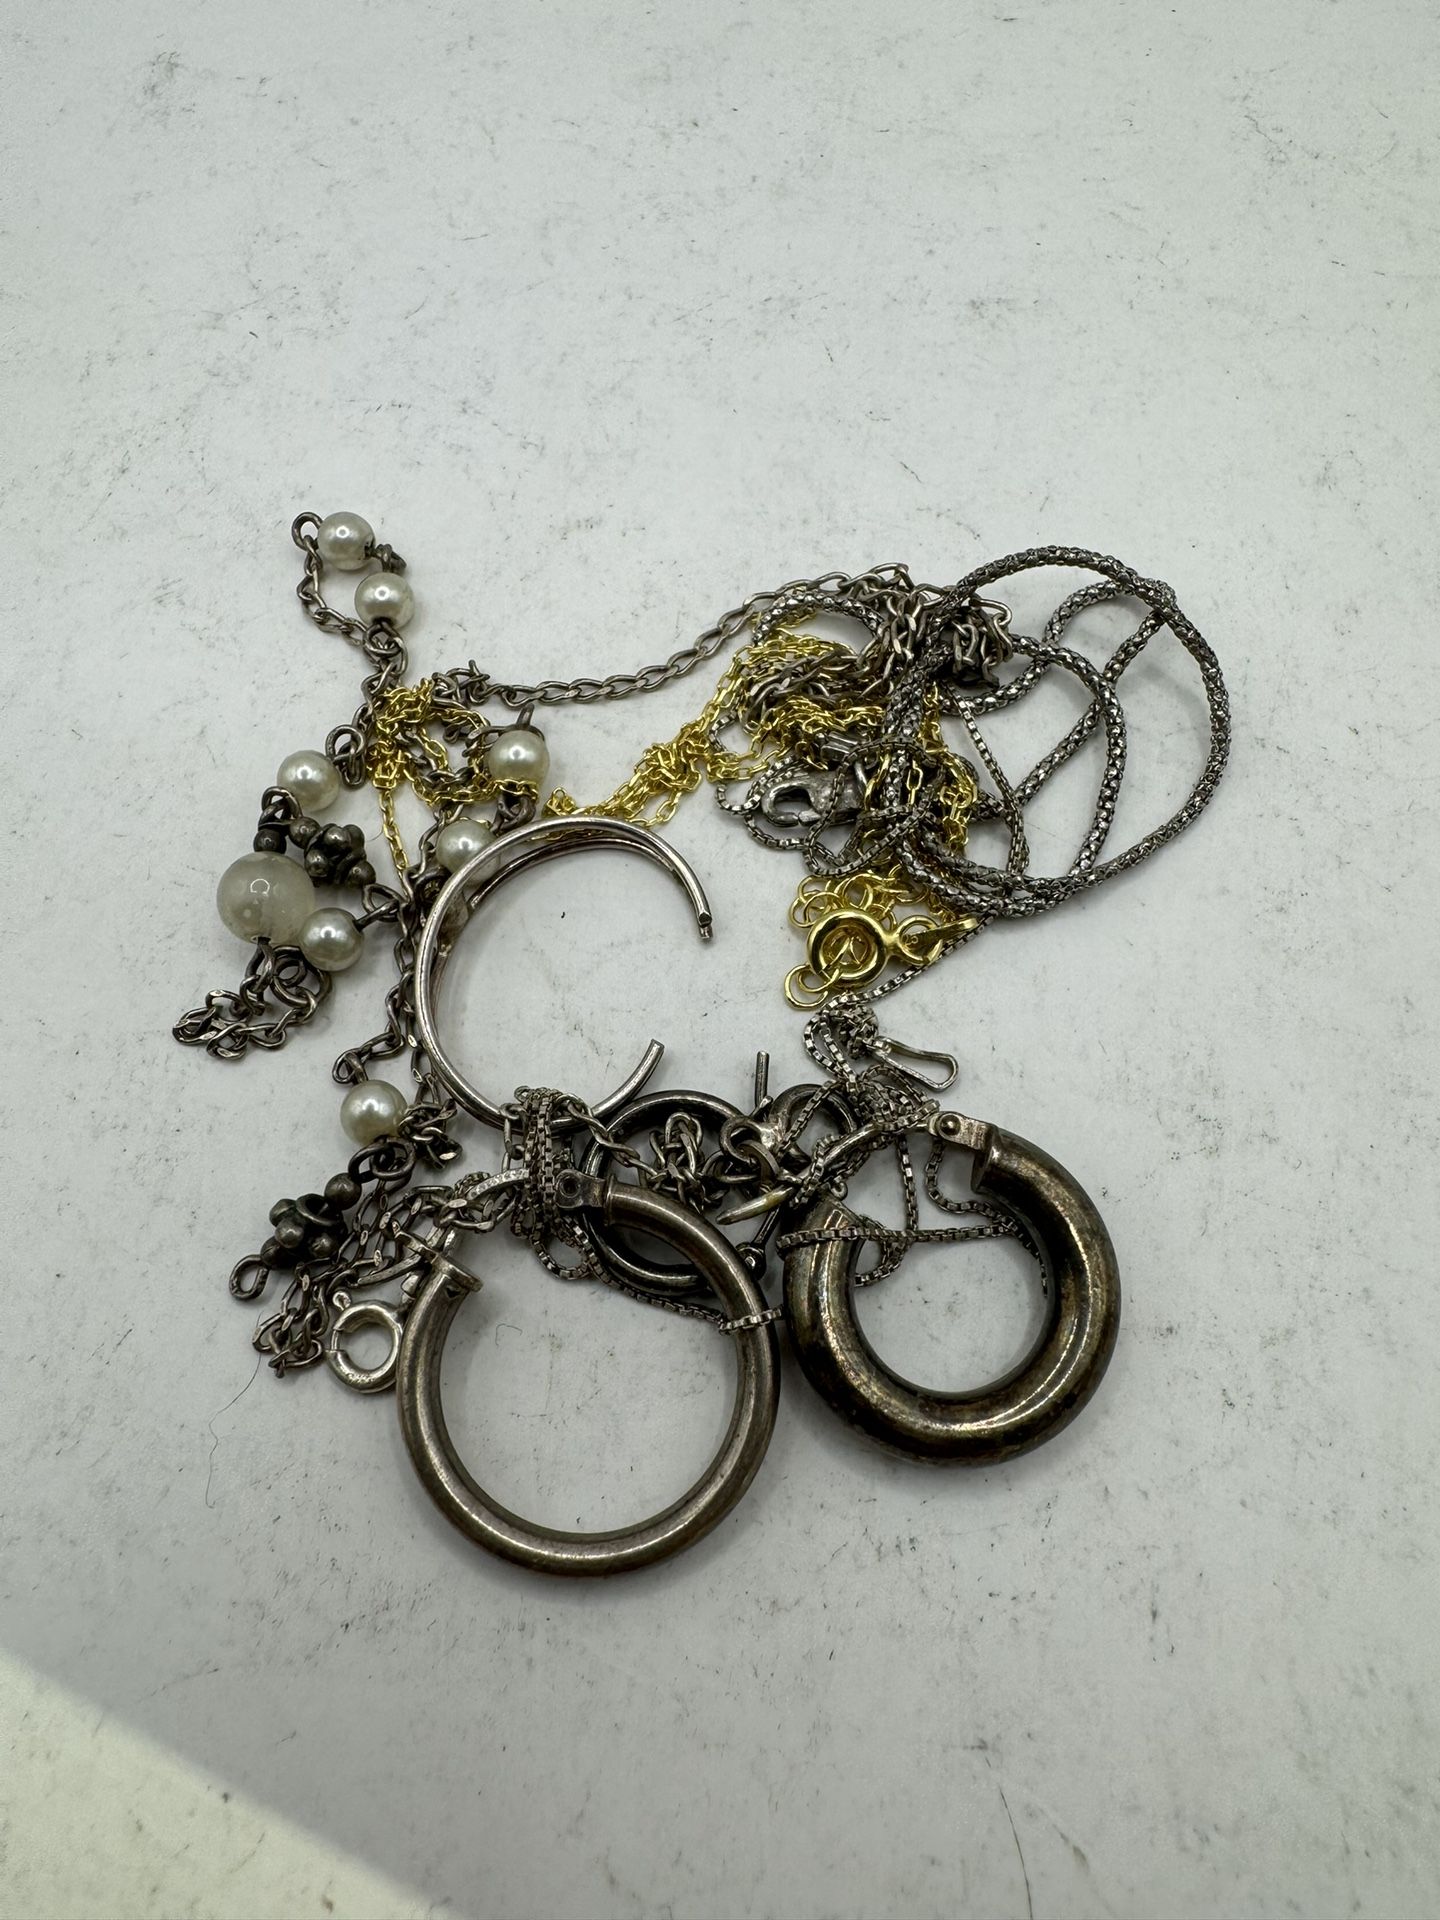 Various Broken Sterling Silver Jewelry Pieces For Silver Melt Value  